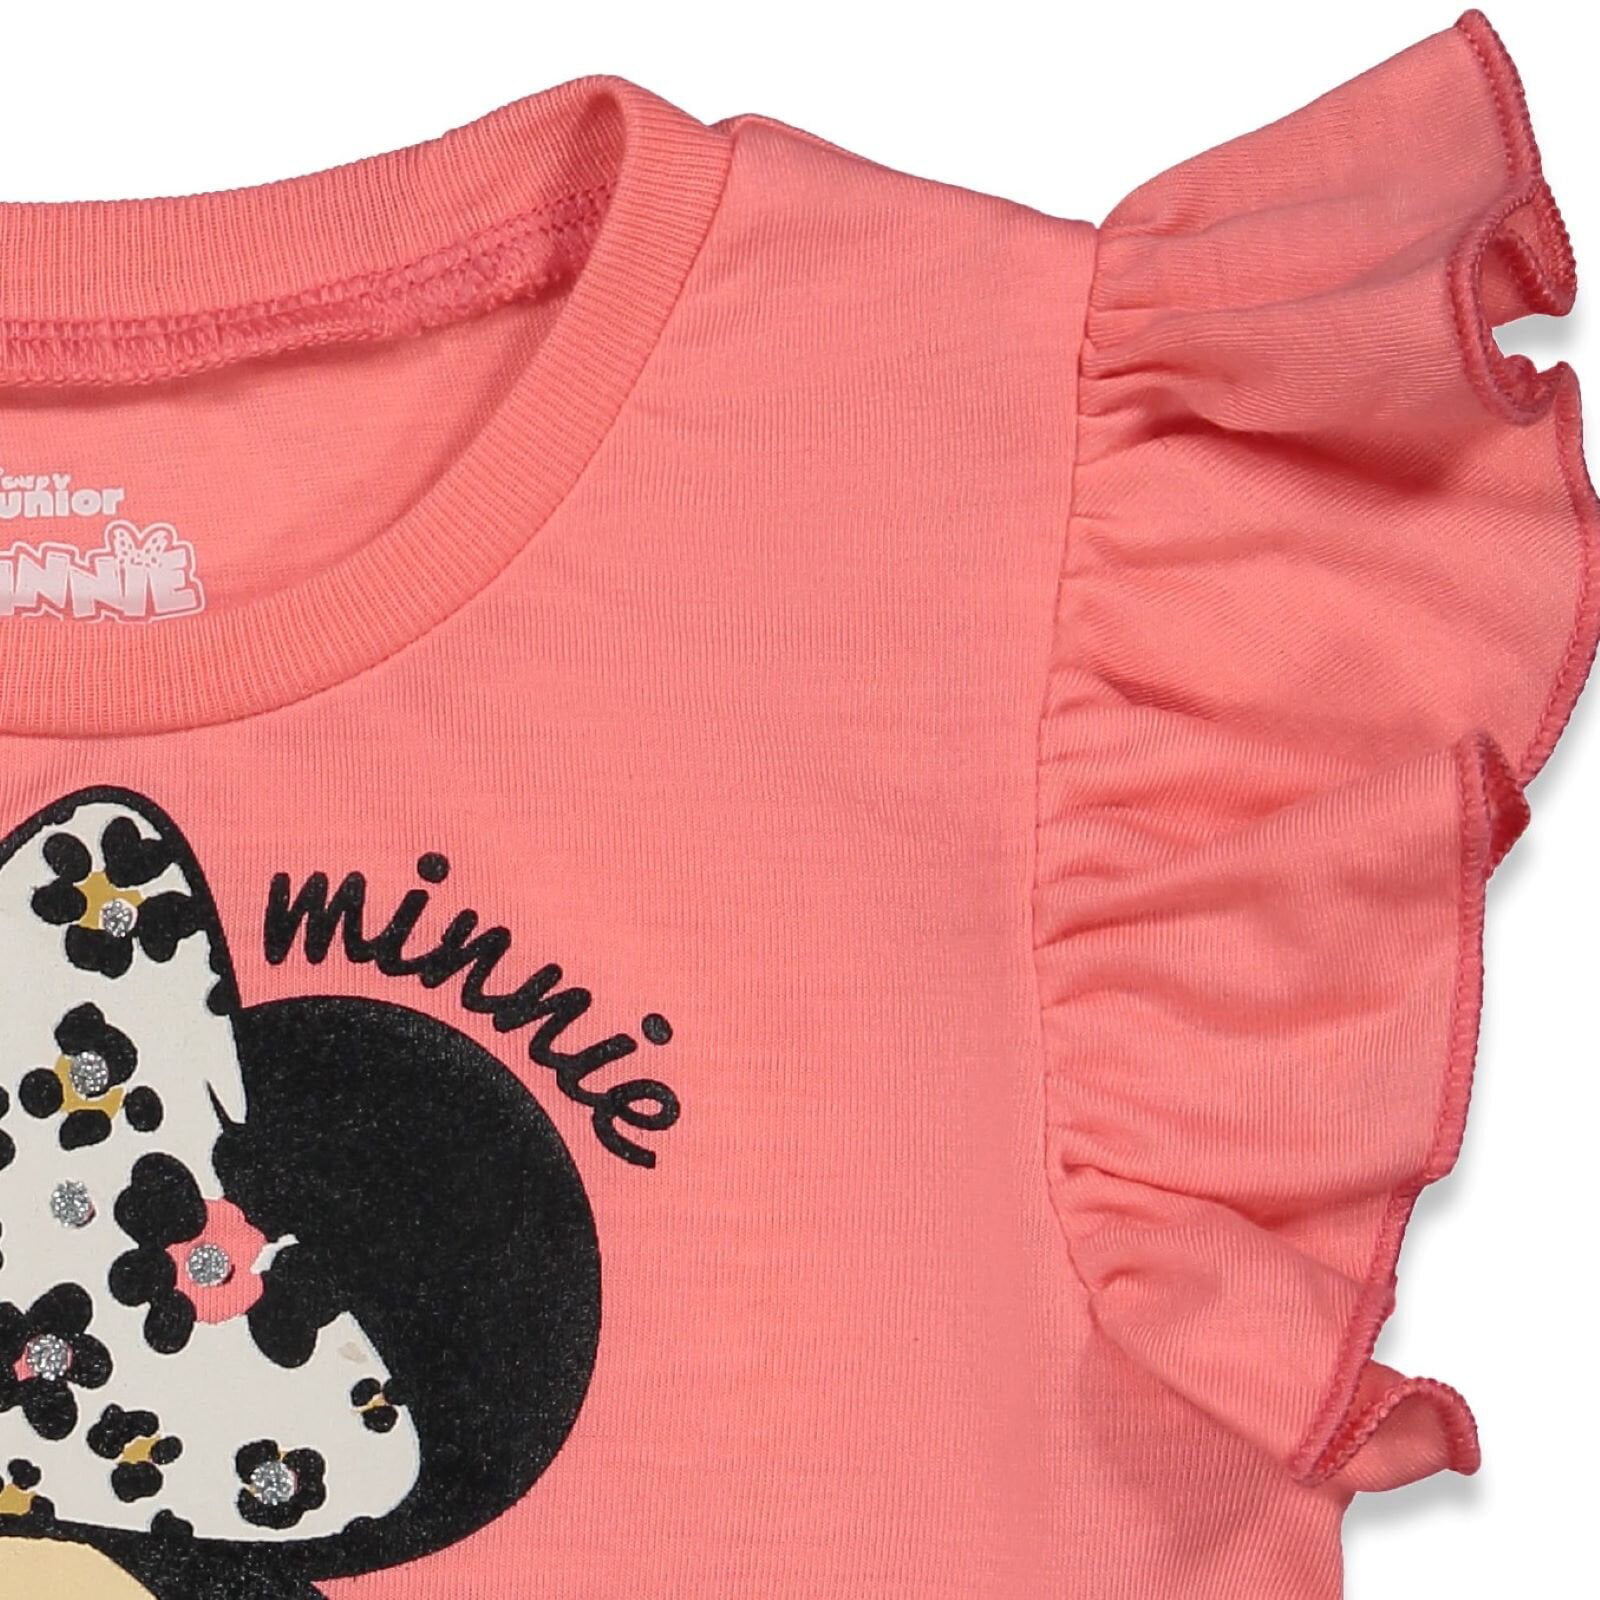 Mommy & Daughter Matching Louis Vuitton Minnie #clothing #women #tshirt  @MktgTool #disneyfamily…